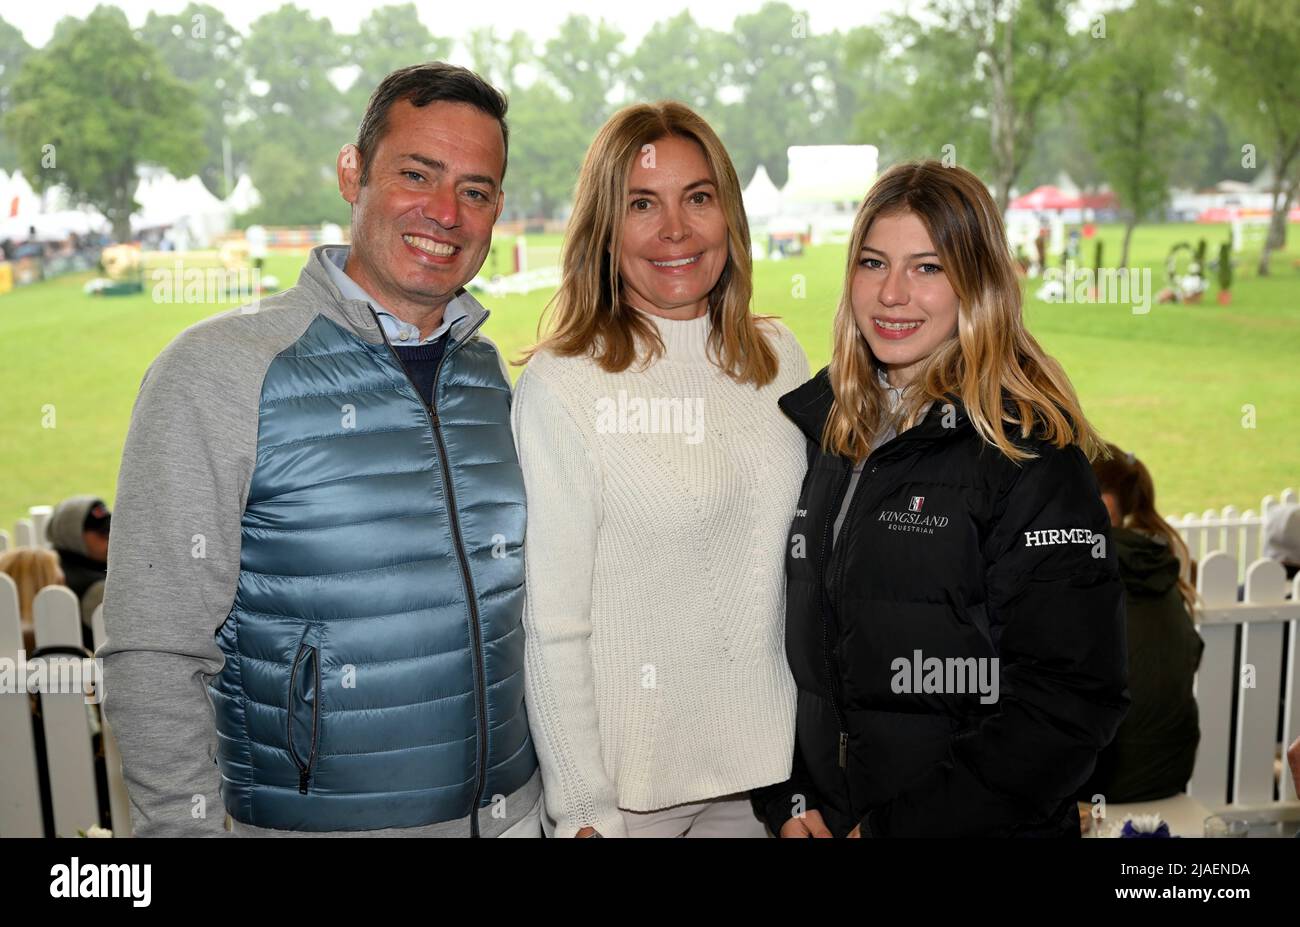 29 May 2022, Bavaria, München-Riem: Entrepreneur Christian Hirmer (l-r), his wife Christiane and their daughter, the rider Leticia, stand on the VIP tribune during the classification test of the Grand Prix of Bavaria at the Pferd International München. The Pferd International München is an event that also features a dressage and show jumping competition and a trade show area. Photo: Felix Hörhager/dpa Stock Photo